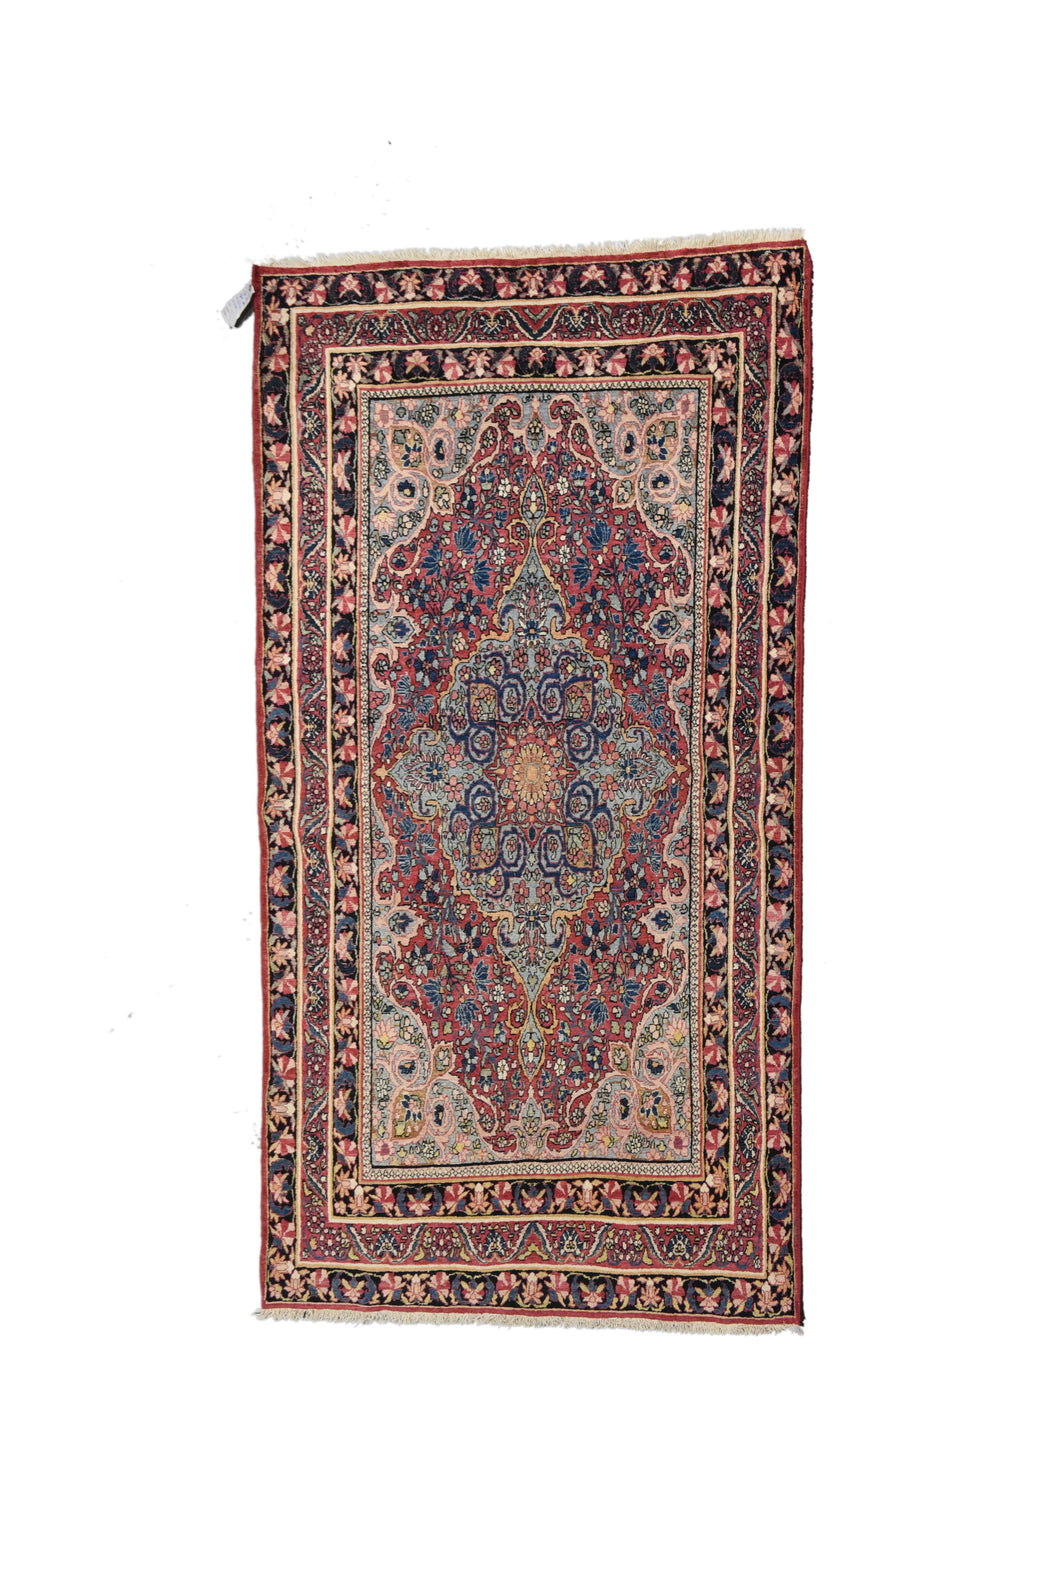 Very Fine Isfahan Persian Rug, Size: 6'11